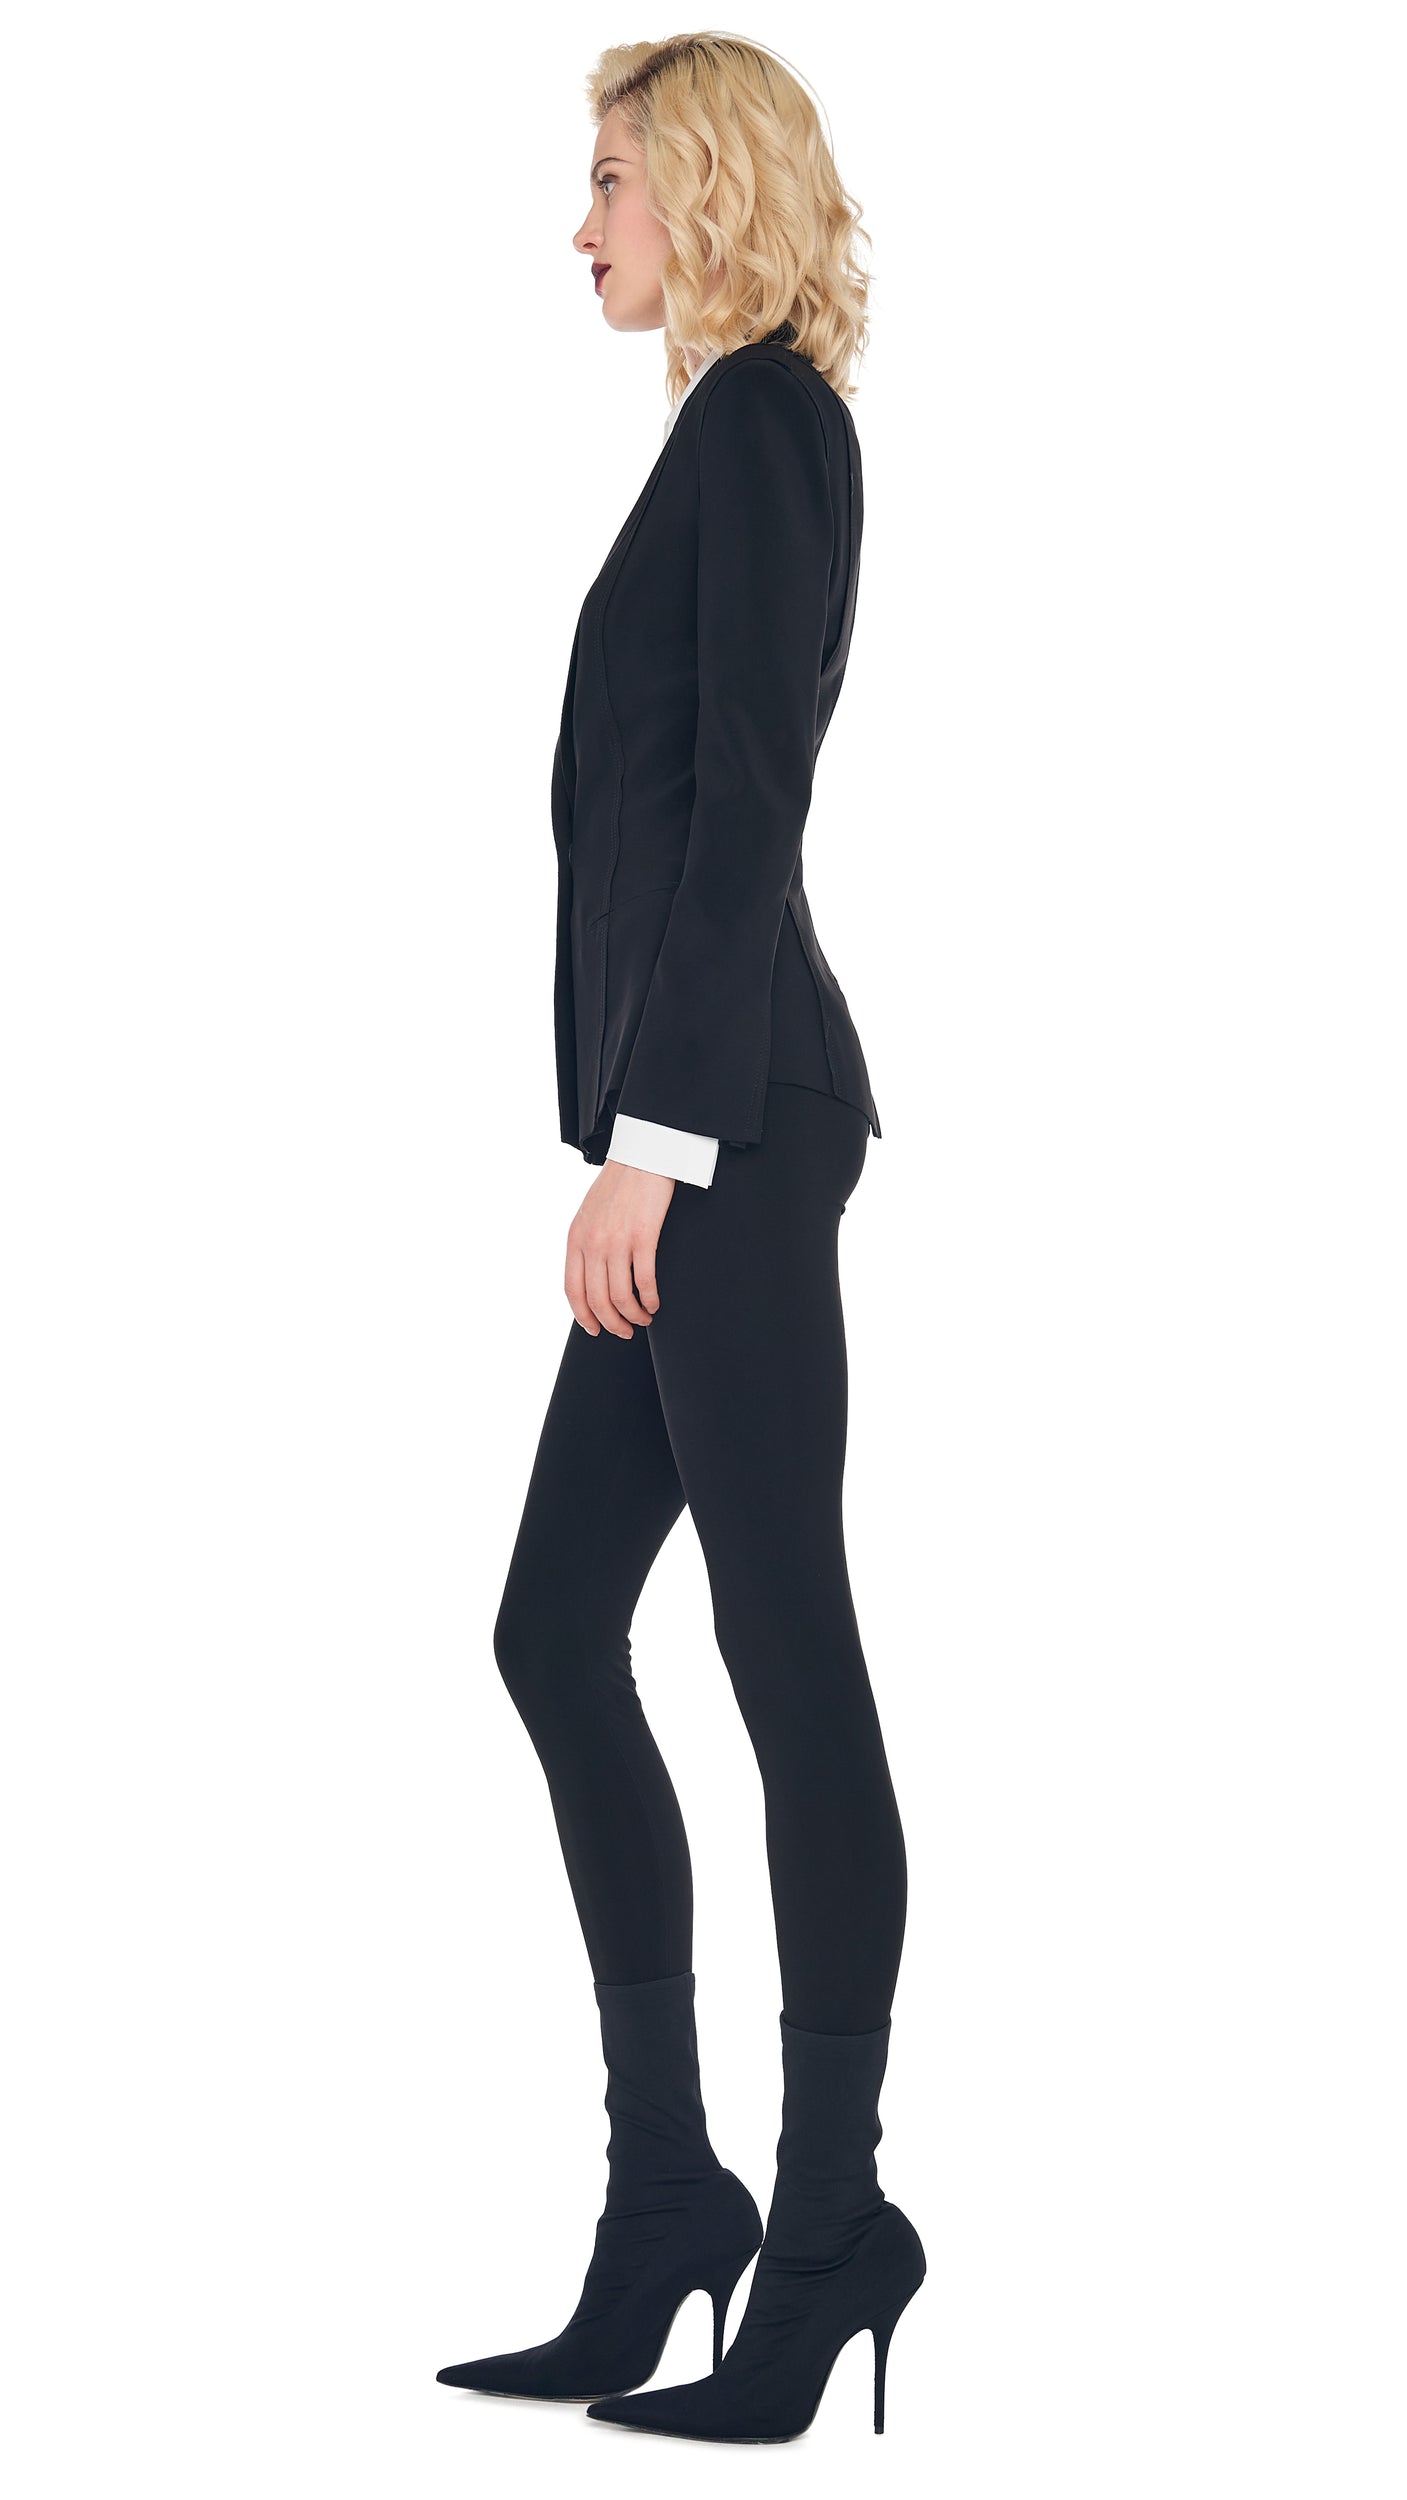 Norma Kamali Footie Leggings Without Waistband in Black